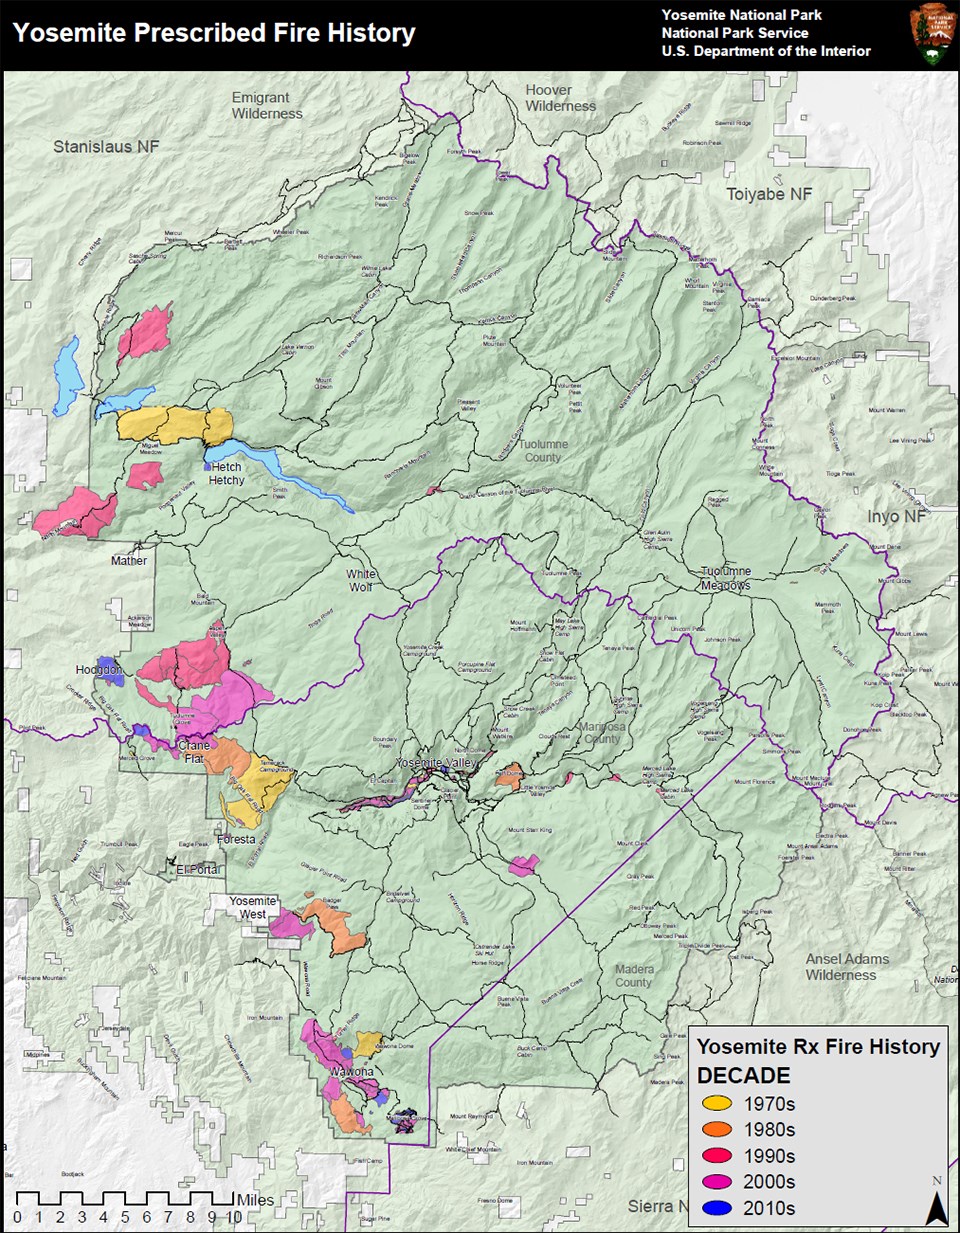 Map showing prescribed fire history by decade